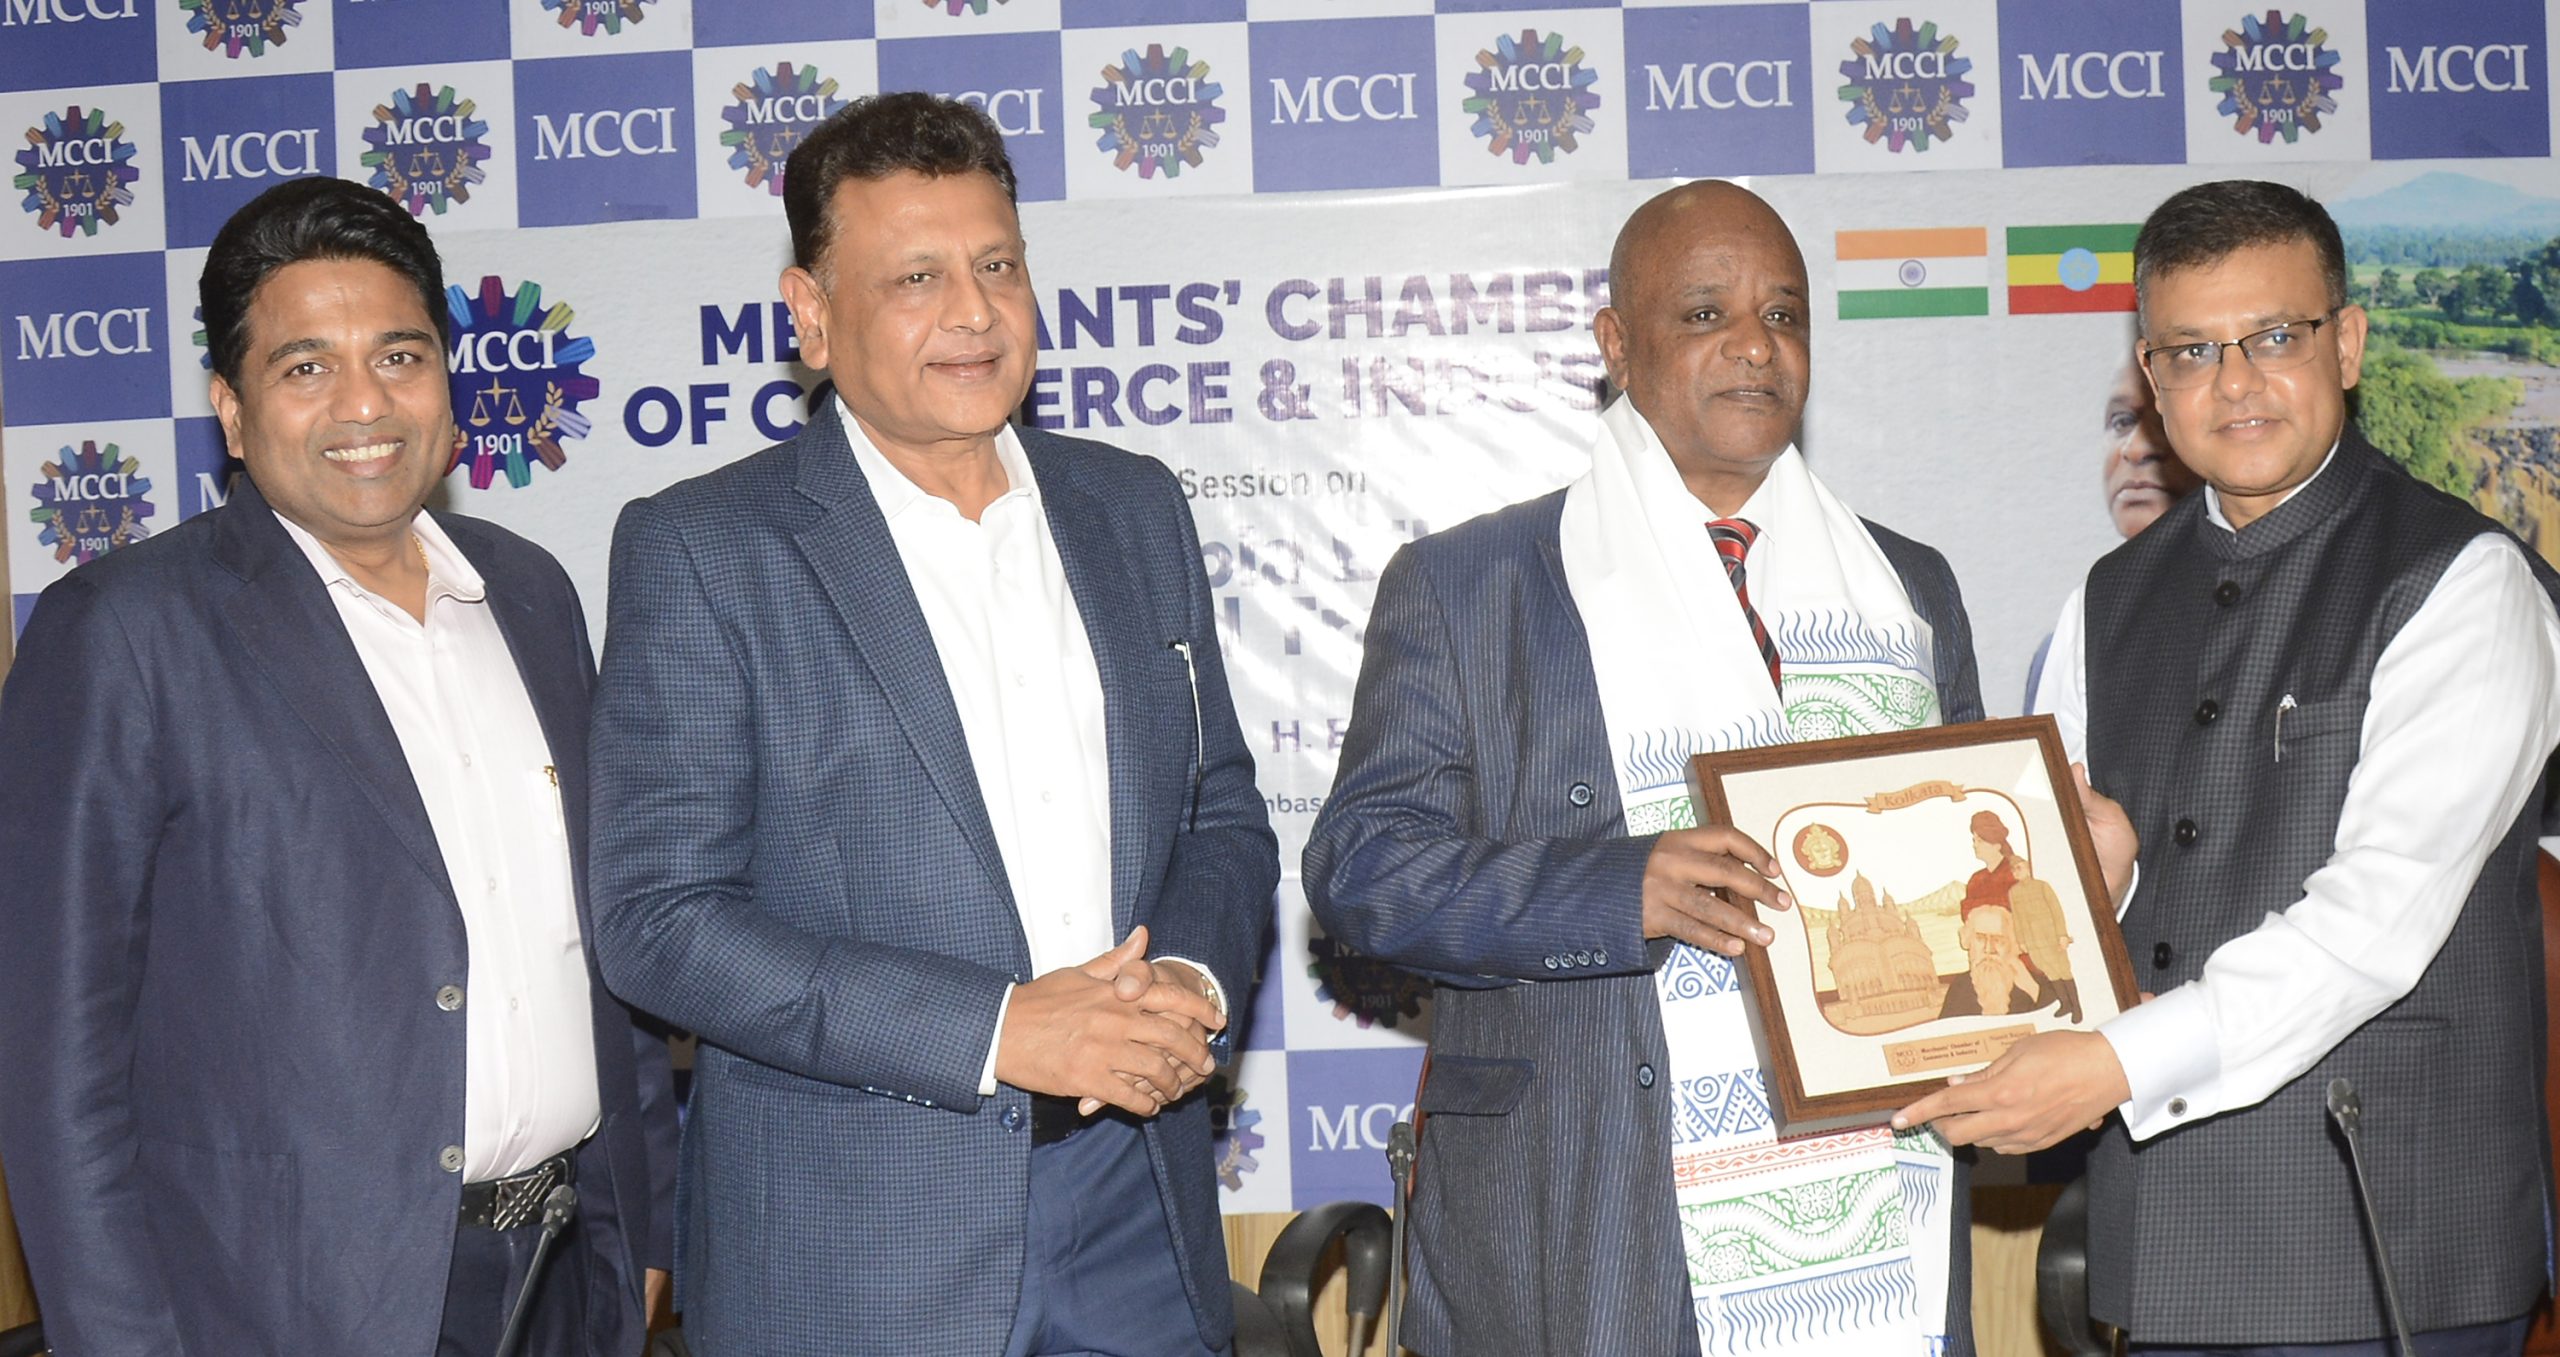 Mr. Rishabh C. Kothari, Immediate Past President, MCCI presenting a memento to H. E. Mr. Demeke Atnafu Ambulo, Ambassador Extraordinary and Plenipotentiary, Embassy of the Federal Democratic Republic of Ethiopia at a Special Session on India-Ethiopia Bilateral Ties & Trade held (TODAY) 10.04.2024 at MCCI. On his right - Mr. Srikant Jain, Co-Chairman, Council on Foreign Trade, MCCI and Mr. Ravi Agarwal, Committee Member, MCCI.